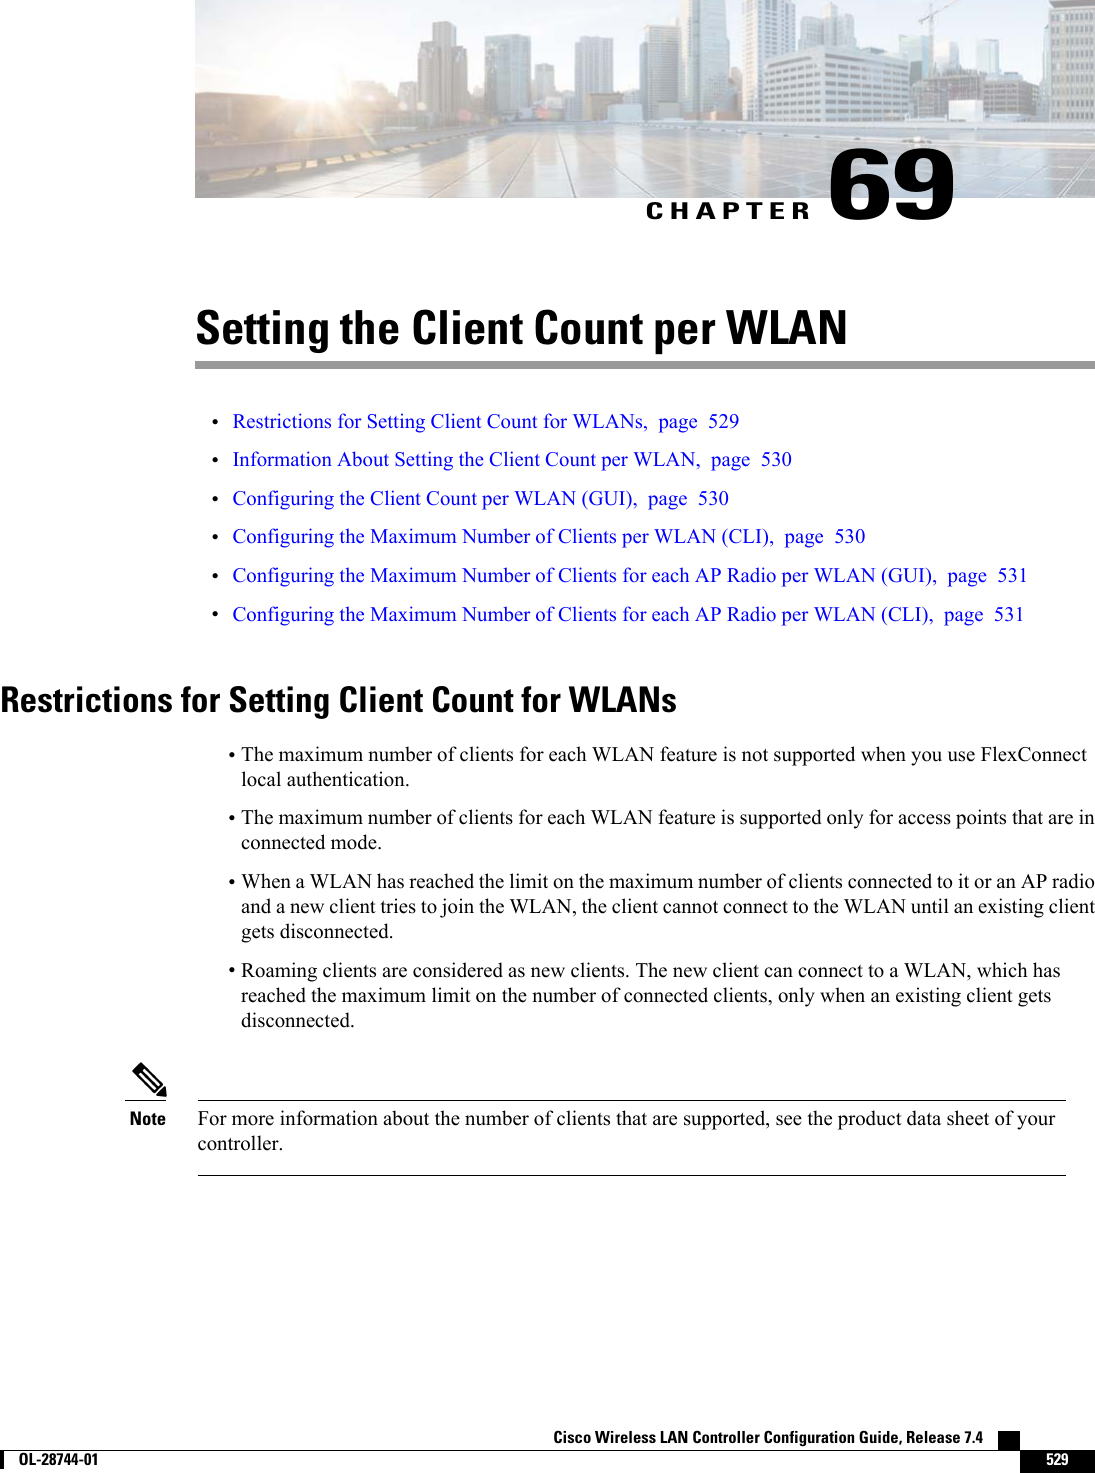 CHAPTER 69Setting the Client Count per WLAN•Restrictions for Setting Client Count for WLANs, page 529•Information About Setting the Client Count per WLAN, page 530•Configuring the Client Count per WLAN (GUI), page 530•Configuring the Maximum Number of Clients per WLAN (CLI), page 530•Configuring the Maximum Number of Clients for each AP Radio per WLAN (GUI), page 531•Configuring the Maximum Number of Clients for each AP Radio per WLAN (CLI), page 531Restrictions for Setting Client Count for WLANs•The maximum number of clients for each WLAN feature is not supported when you use FlexConnectlocal authentication.•The maximum number of clients for each WLAN feature is supported only for access points that are inconnected mode.•When a WLAN has reached the limit on the maximum number of clients connected to it or an AP radioand a new client tries to join the WLAN, the client cannot connect to the WLAN until an existing clientgets disconnected.•Roaming clients are considered as new clients. The new client can connect to a WLAN, which hasreached the maximum limit on the number of connected clients, only when an existing client getsdisconnected.For more information about the number of clients that are supported, see the product data sheet of yourcontroller.NoteCisco Wireless LAN Controller Configuration Guide, Release 7.4        OL-28744-01 529